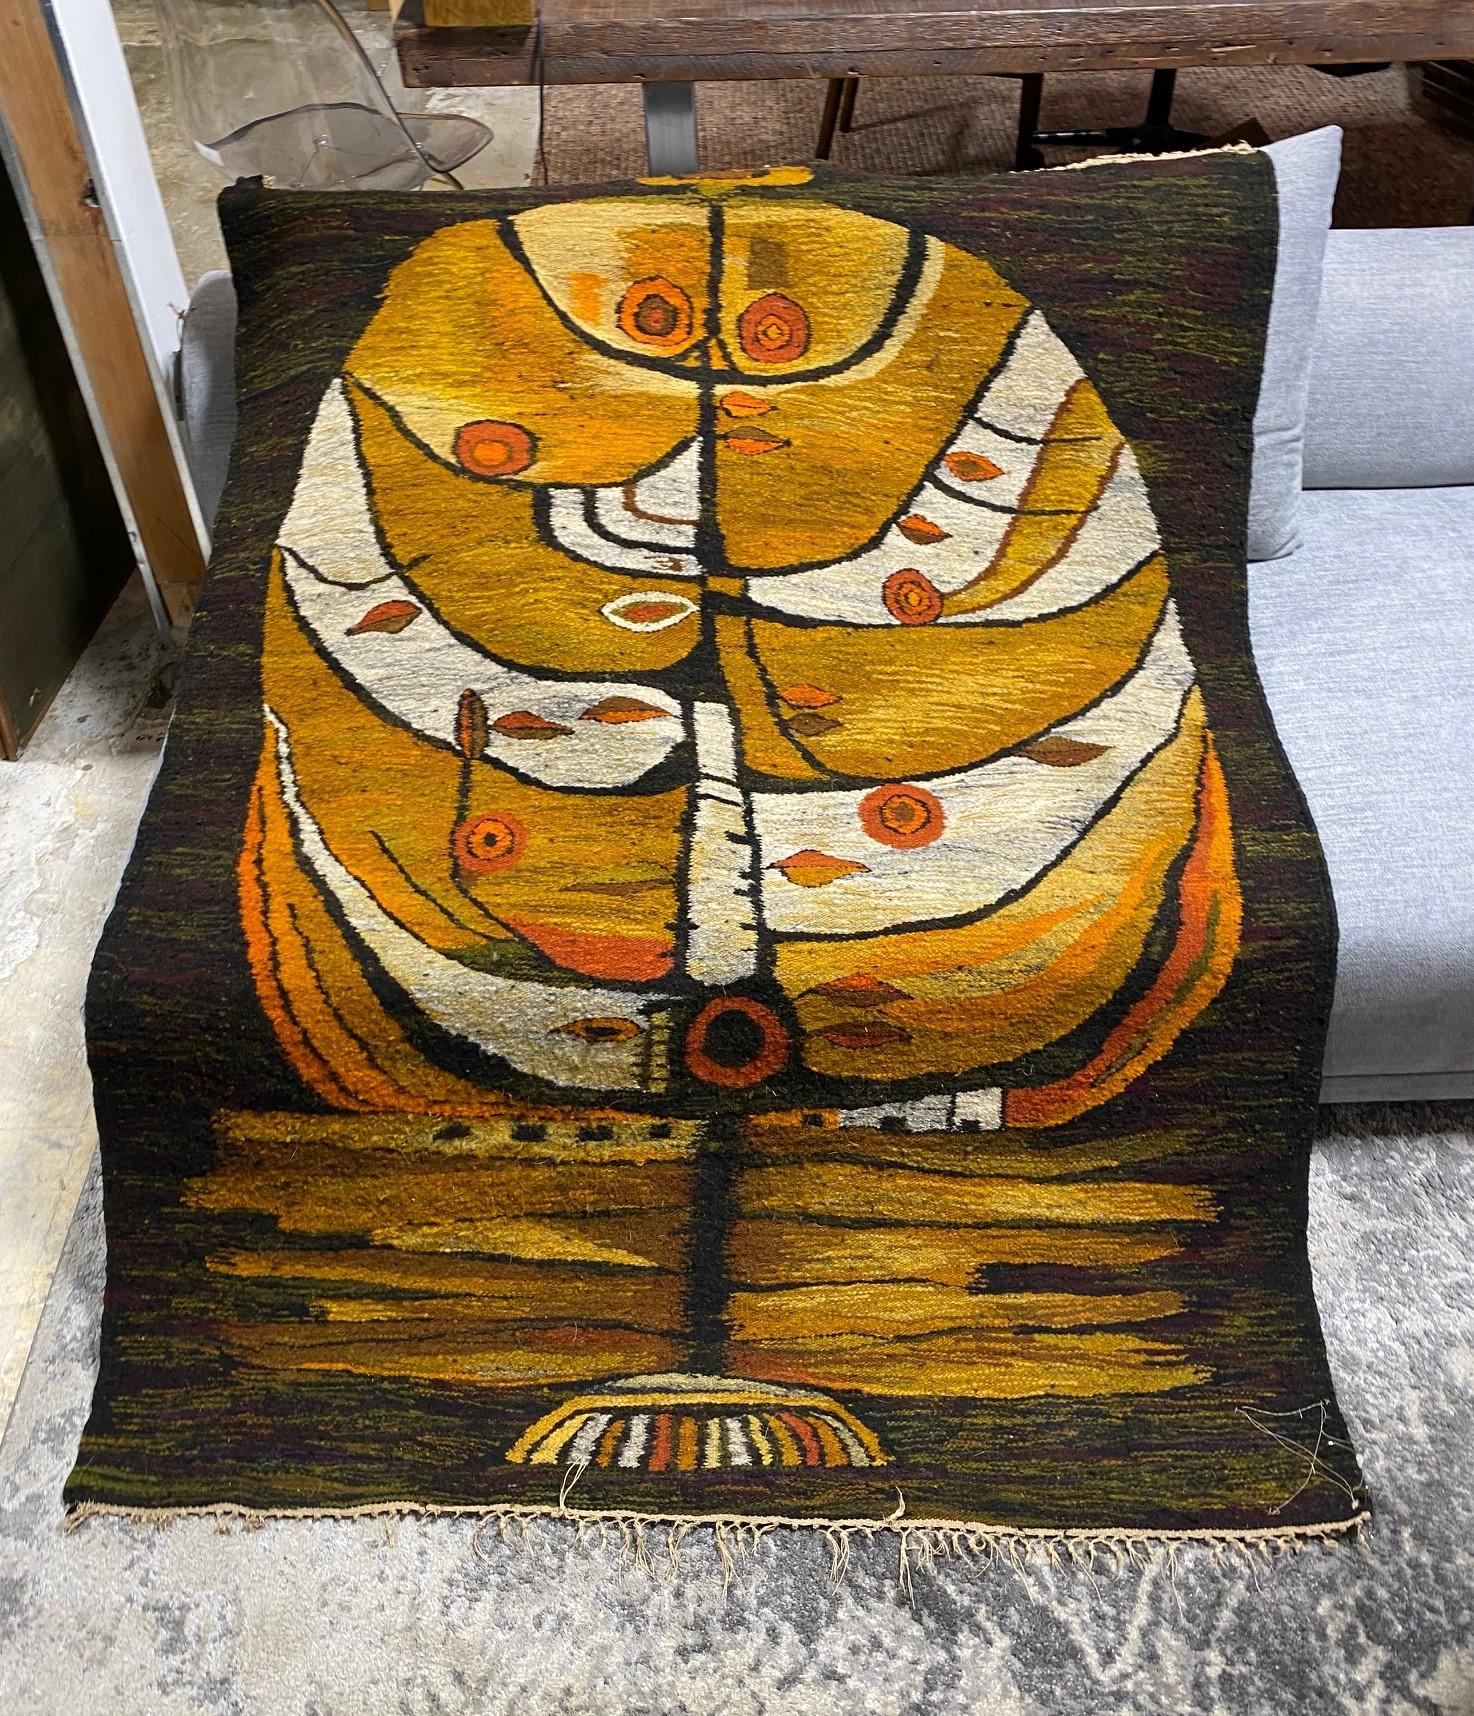 A truly wonderful and rivetting large Mid-Century Modern tapestry / wall hanging / rug with fantastic graphic design and rich warm colors. Handwoven from wool.

Retains the original polish maker cepelia tag with the designer and weaver information